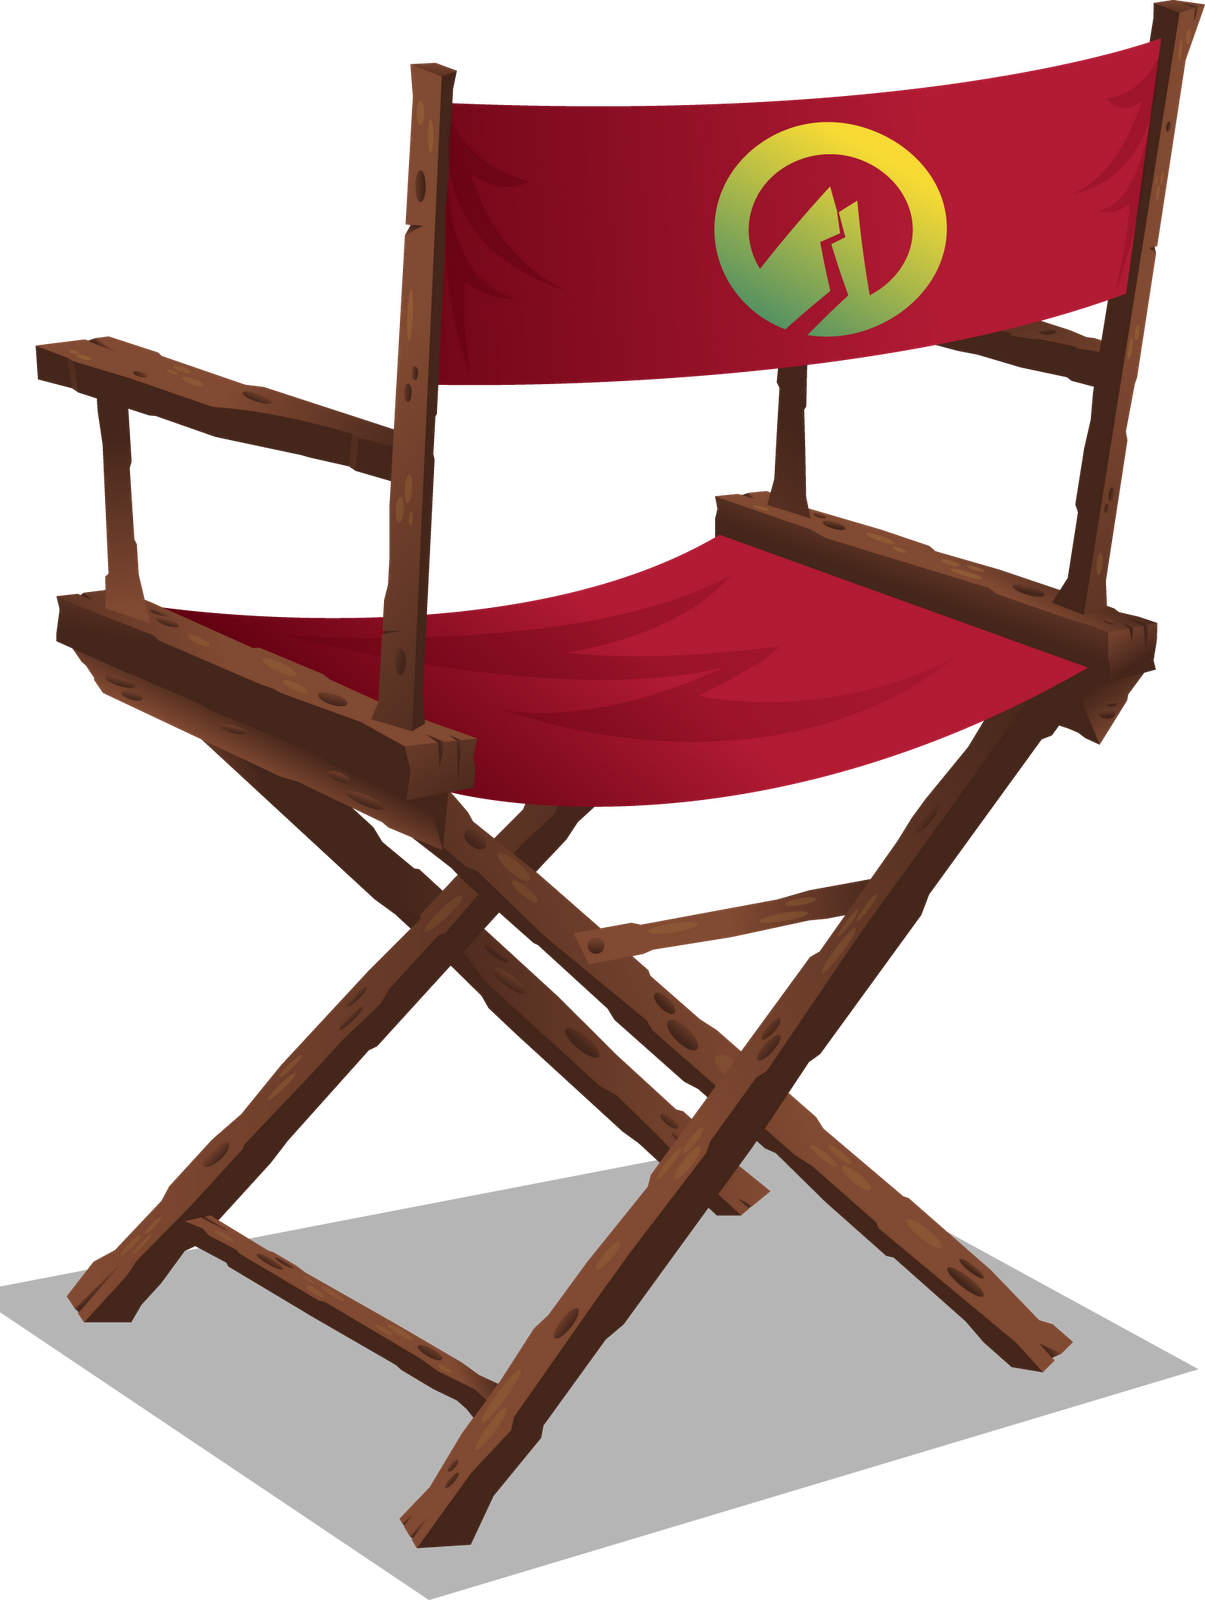 Chair Design Design With Simple Directors Chair Uk - Directors Chair (1205x1600)